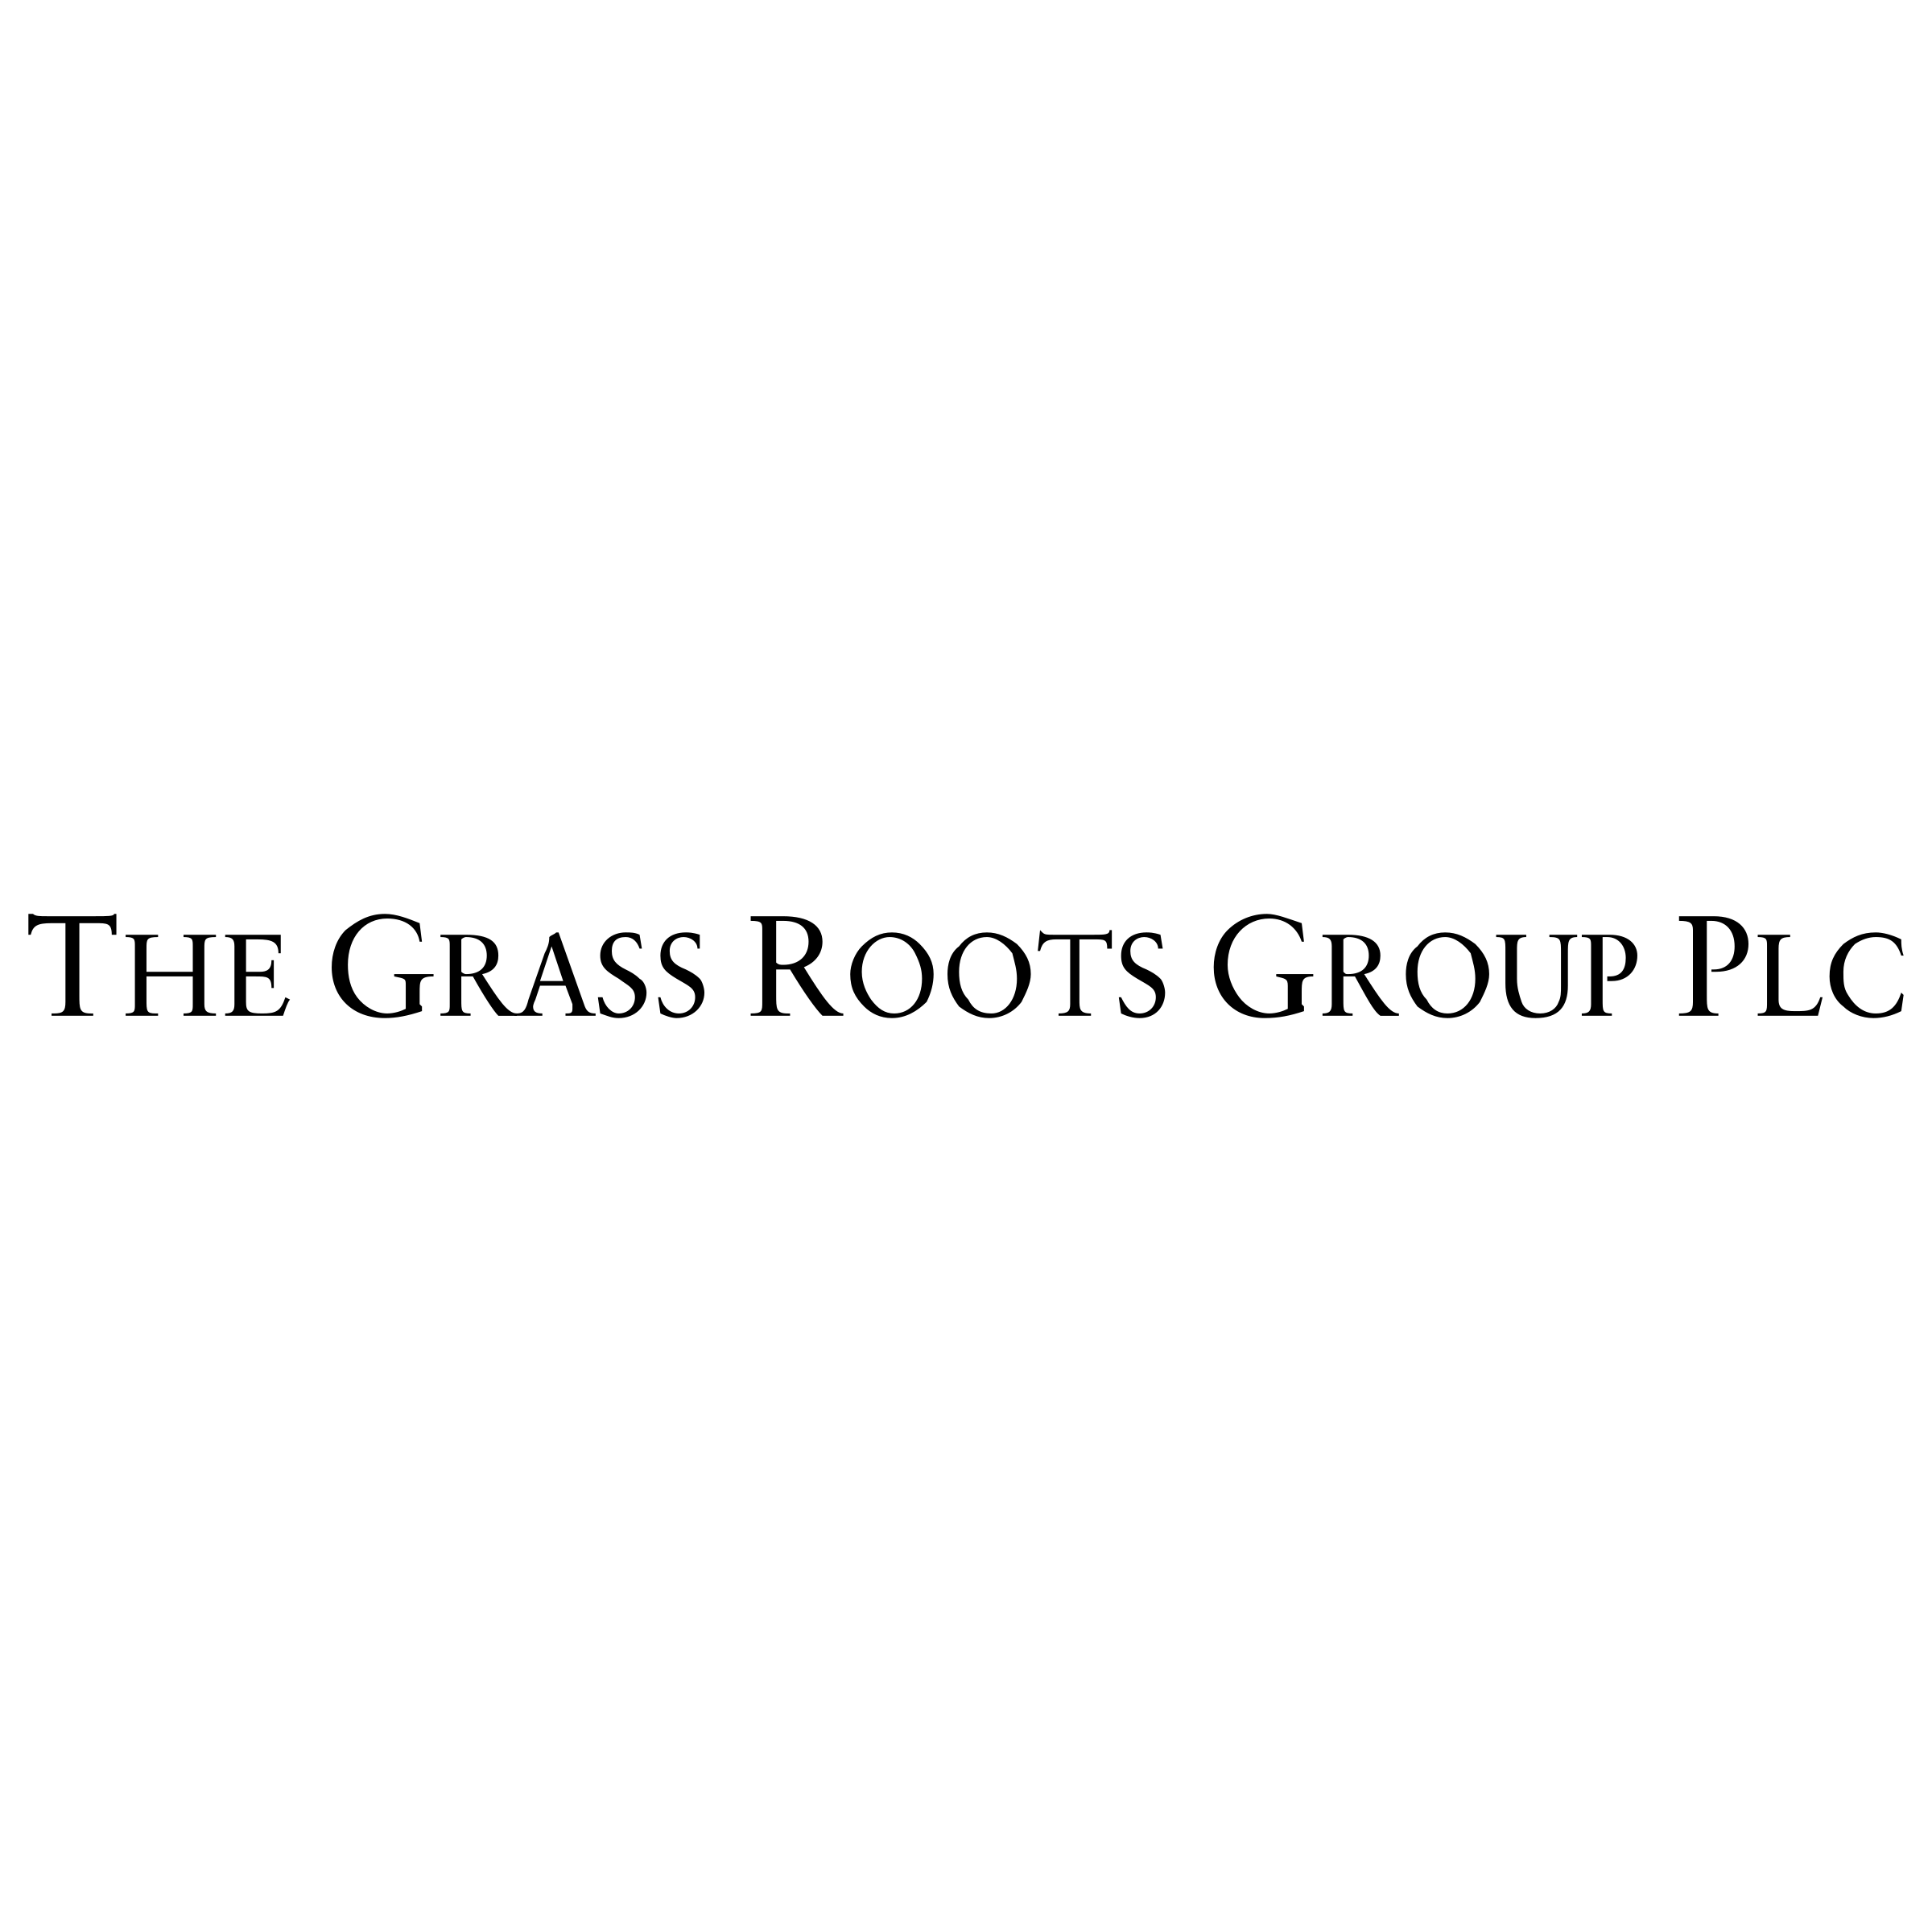 Black Grass Logo - The Grass Roots Group Logo PNG Transparent & SVG Vector - Freebie Supply